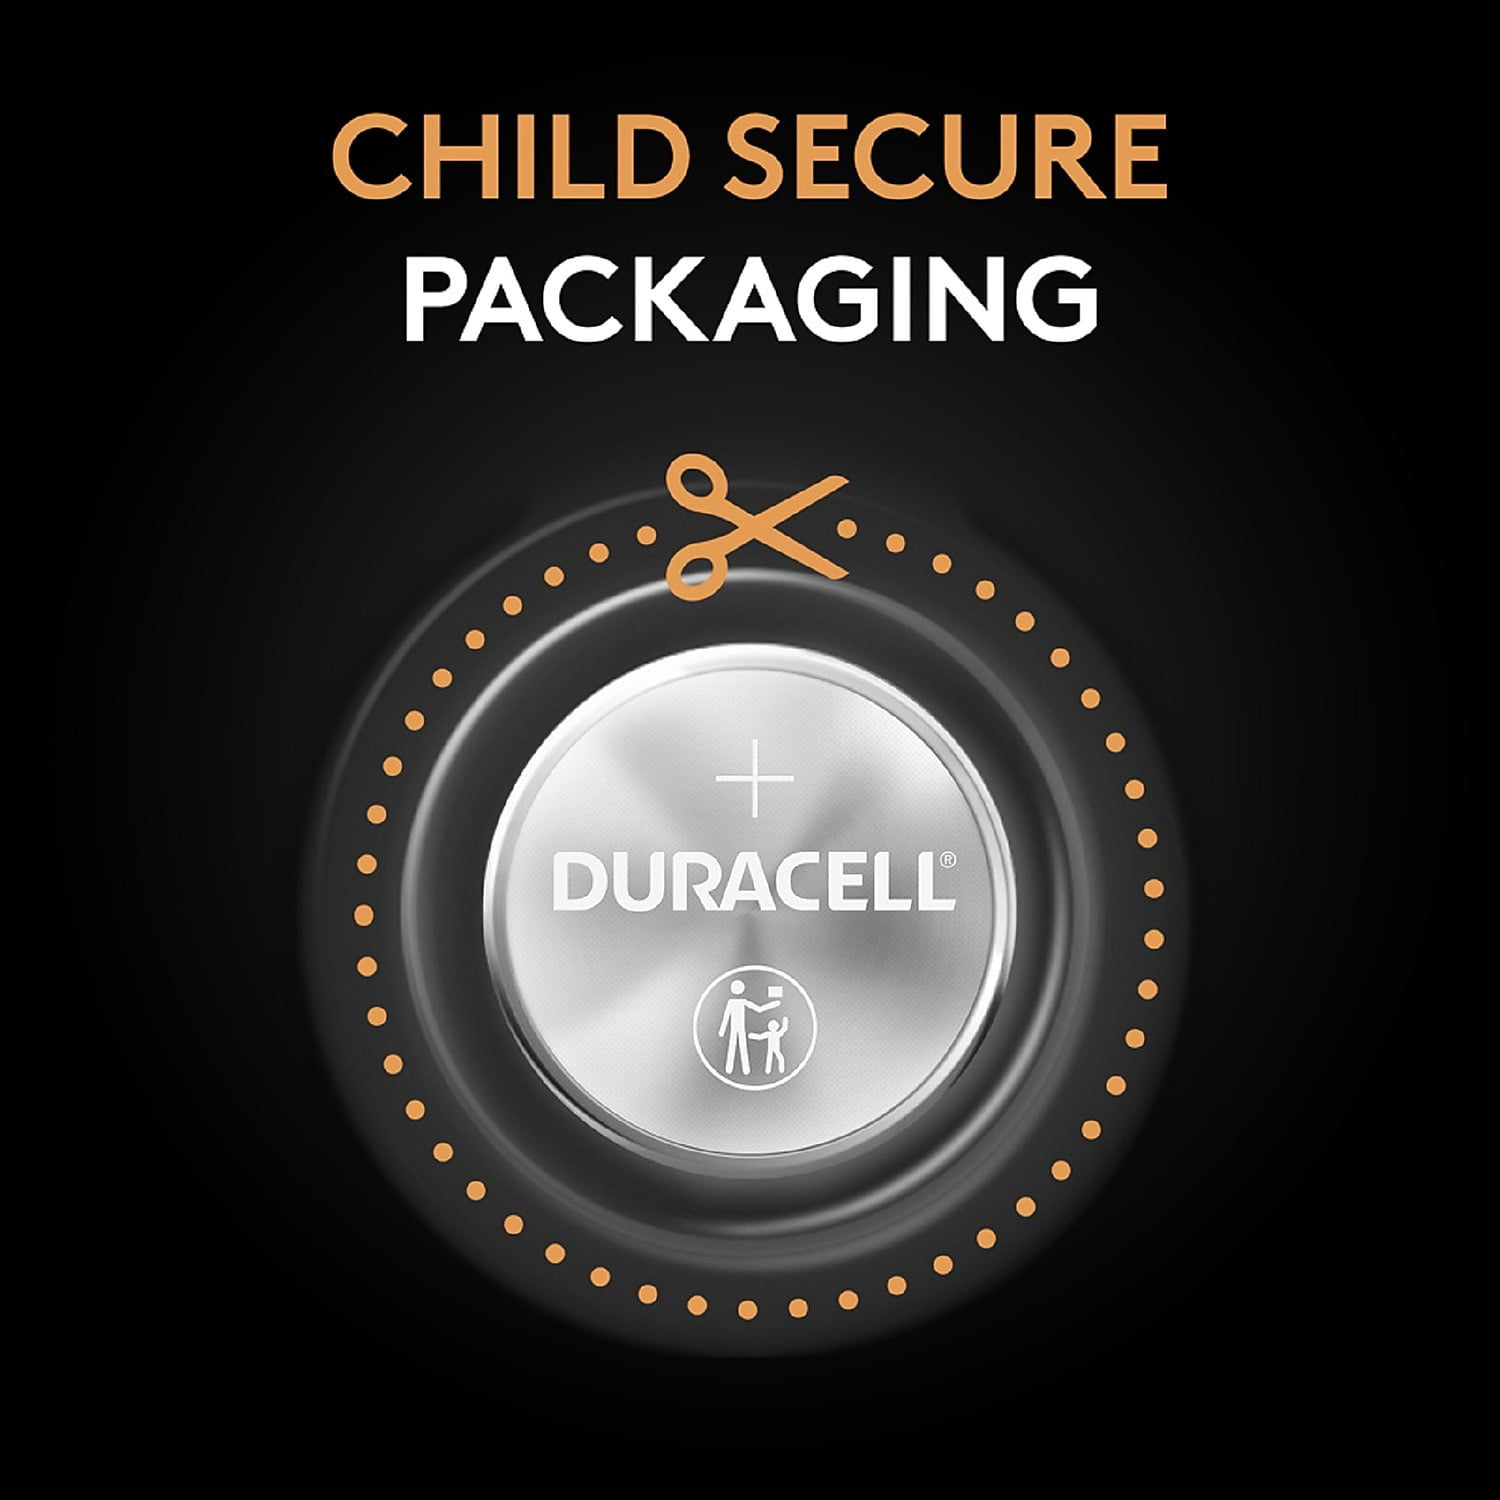 Duracell 2032 Lithium Coin Battery - 2pk Specialty Battery w/ Bitterant  Technology